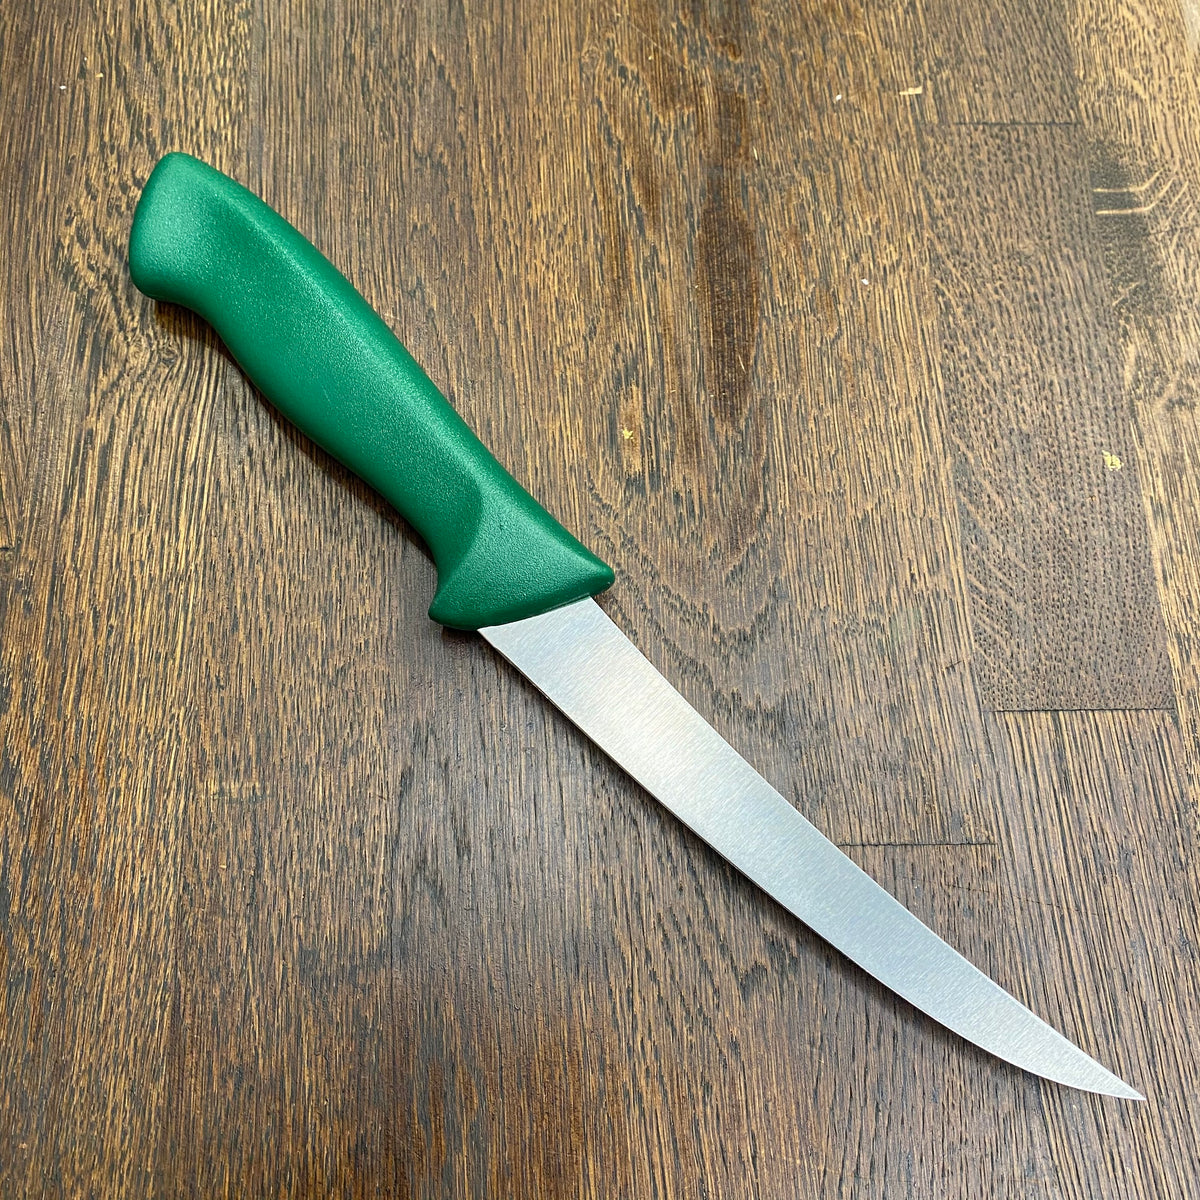 Friedr Herder Don Carlos 6" Boning Knife Curved Flex Stainless Green